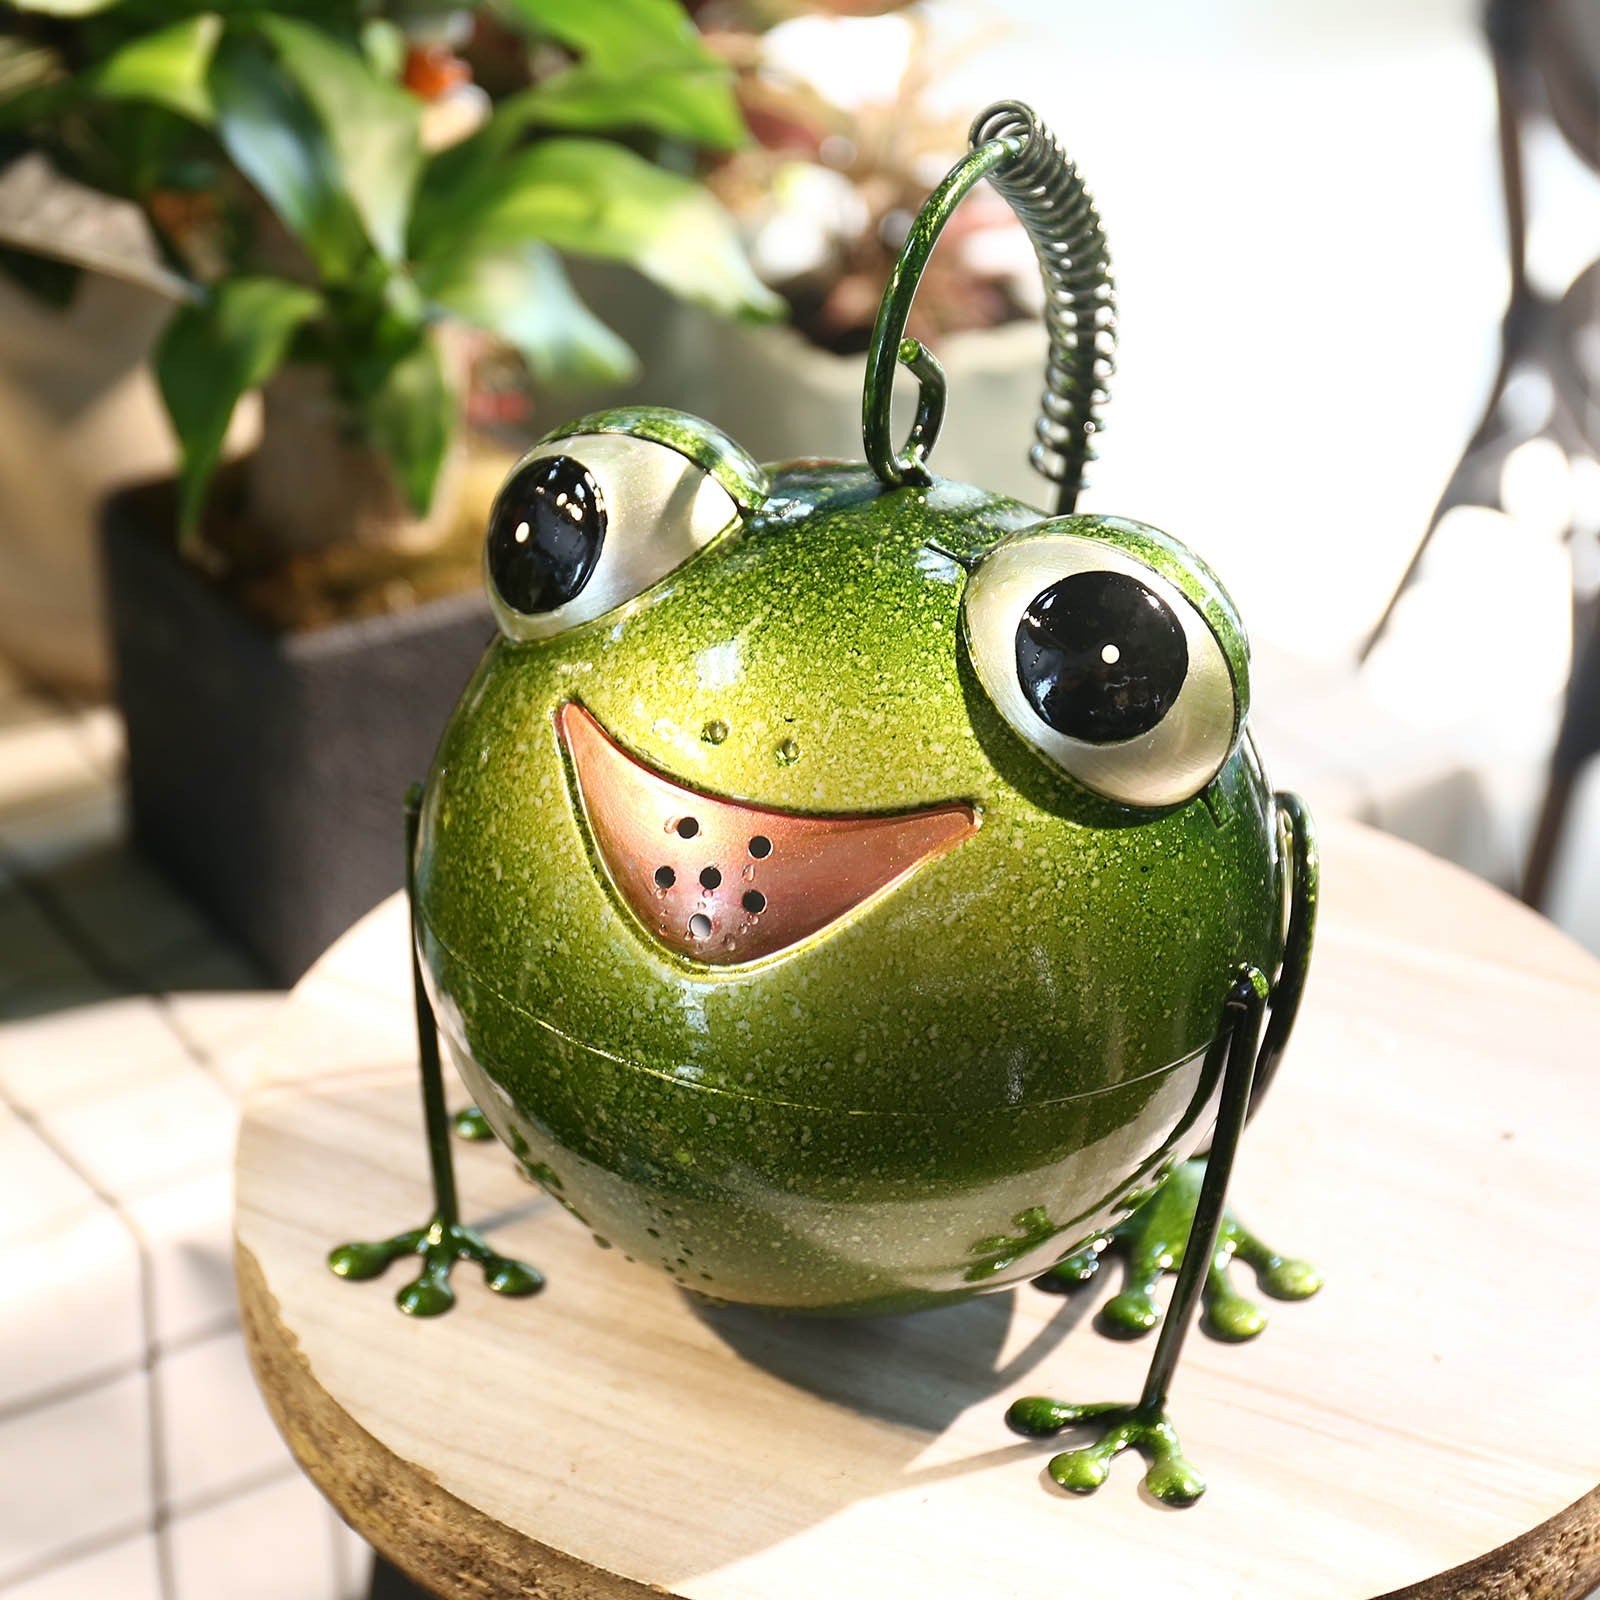 You've found cutest watering pot around for garden or indoor decor!